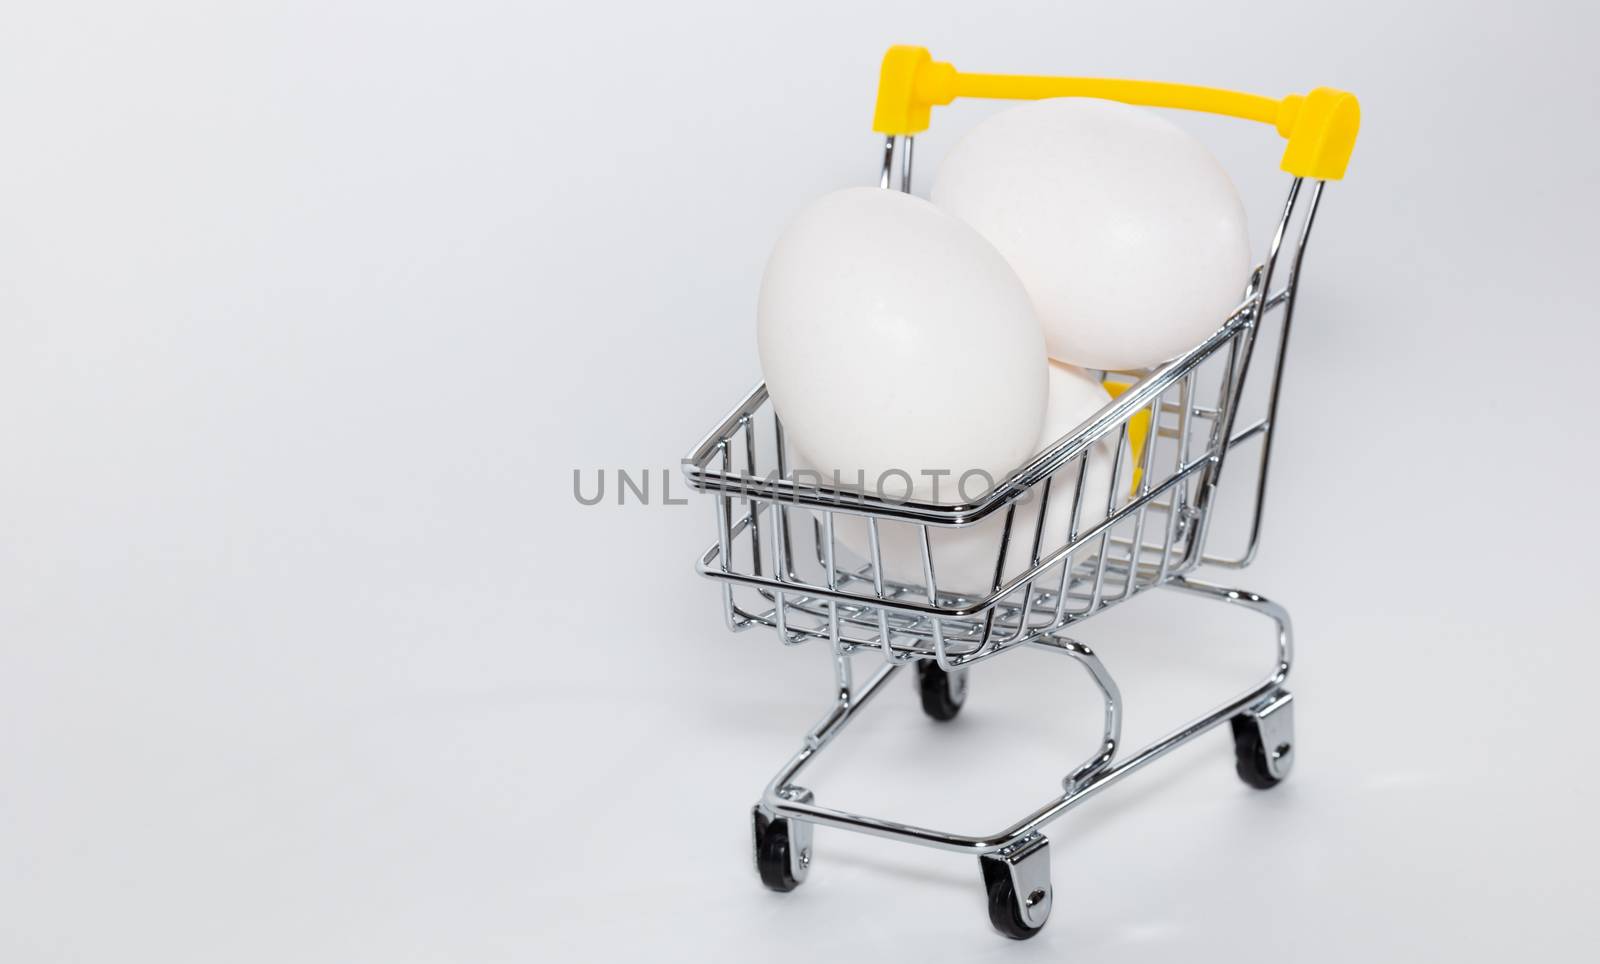 Fresh eggs in a shopping cart. High angle shot. Shopping, purchasing, and food delivery concept. White background. Close-up shot. Isolated. Copy space.